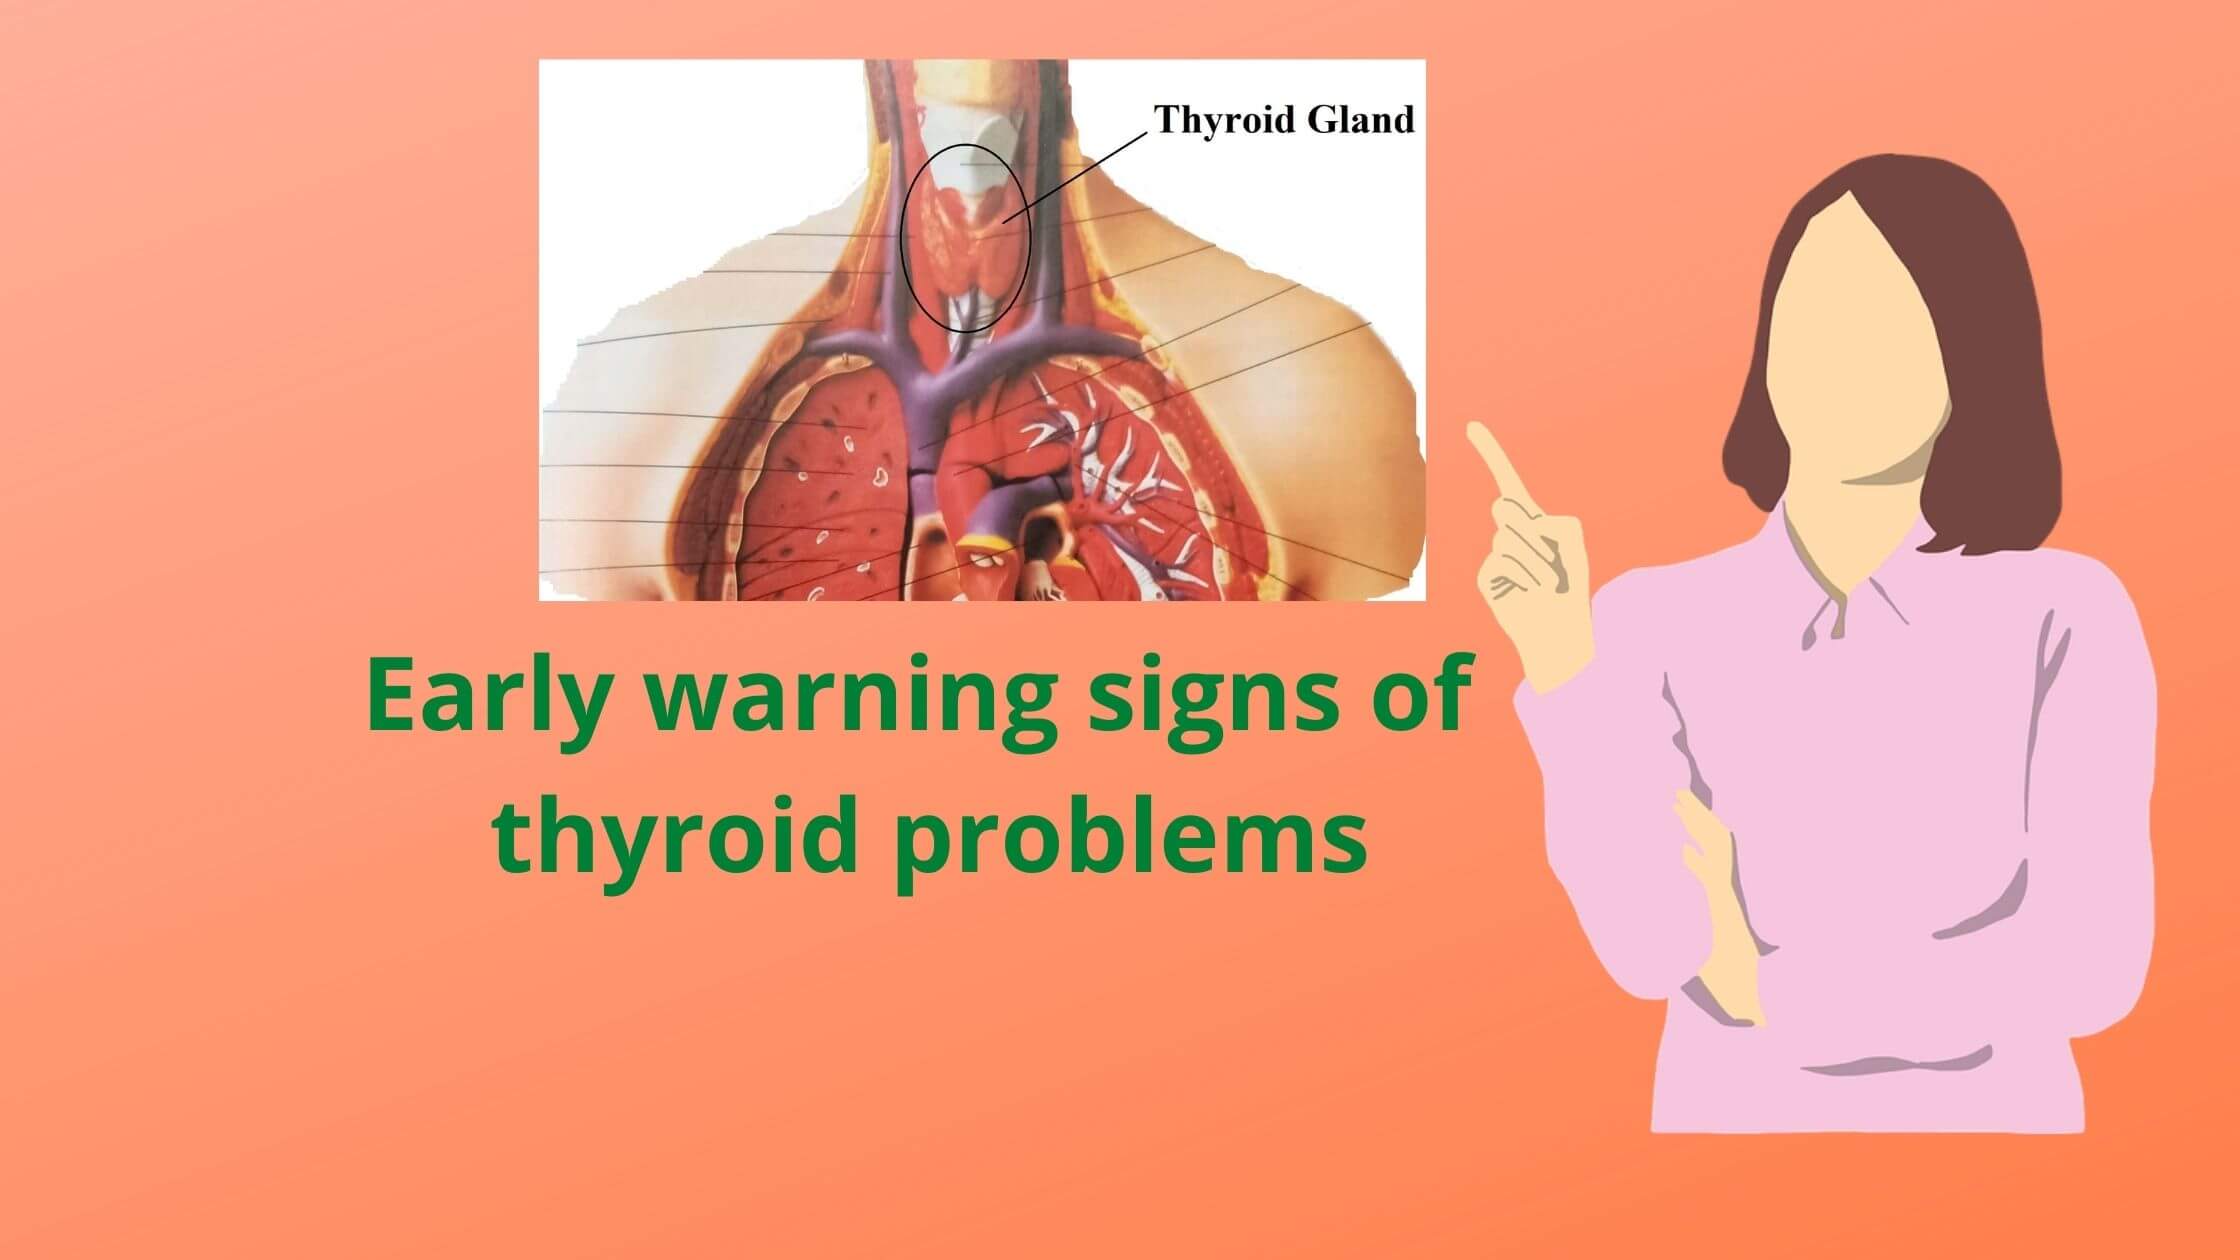 what are early warning signs of thyroid problems